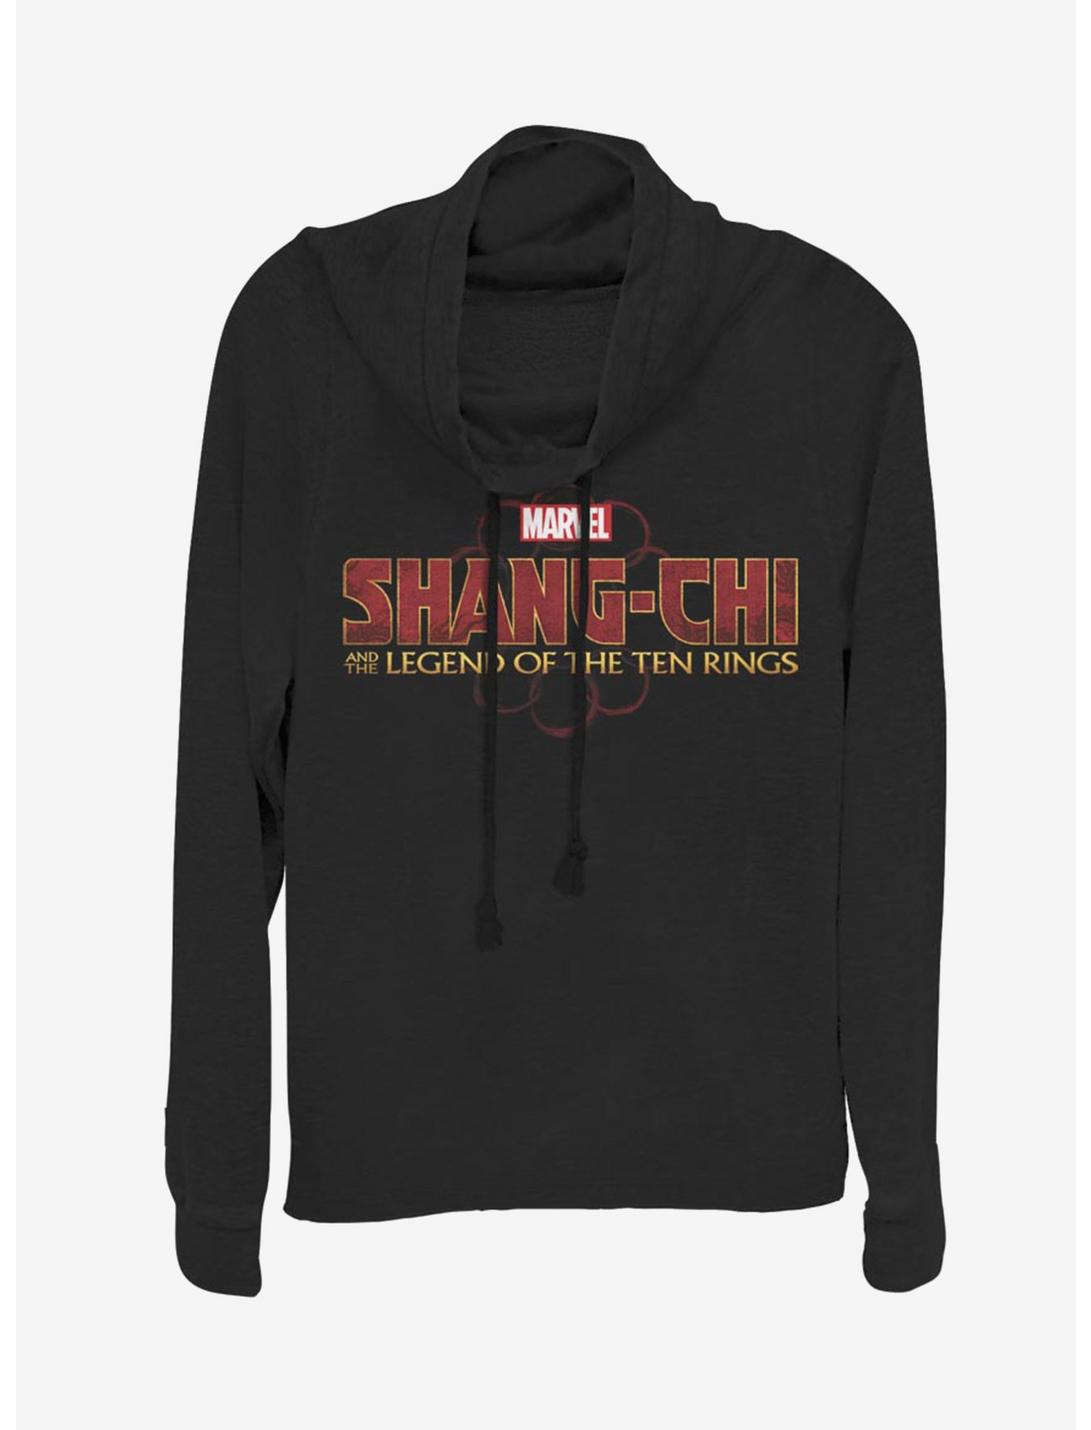 Marvel Shang-Chi And The Legend Of The Ten Rings Cowlneck Long-Sleeve Womens Top, BLACK, hi-res